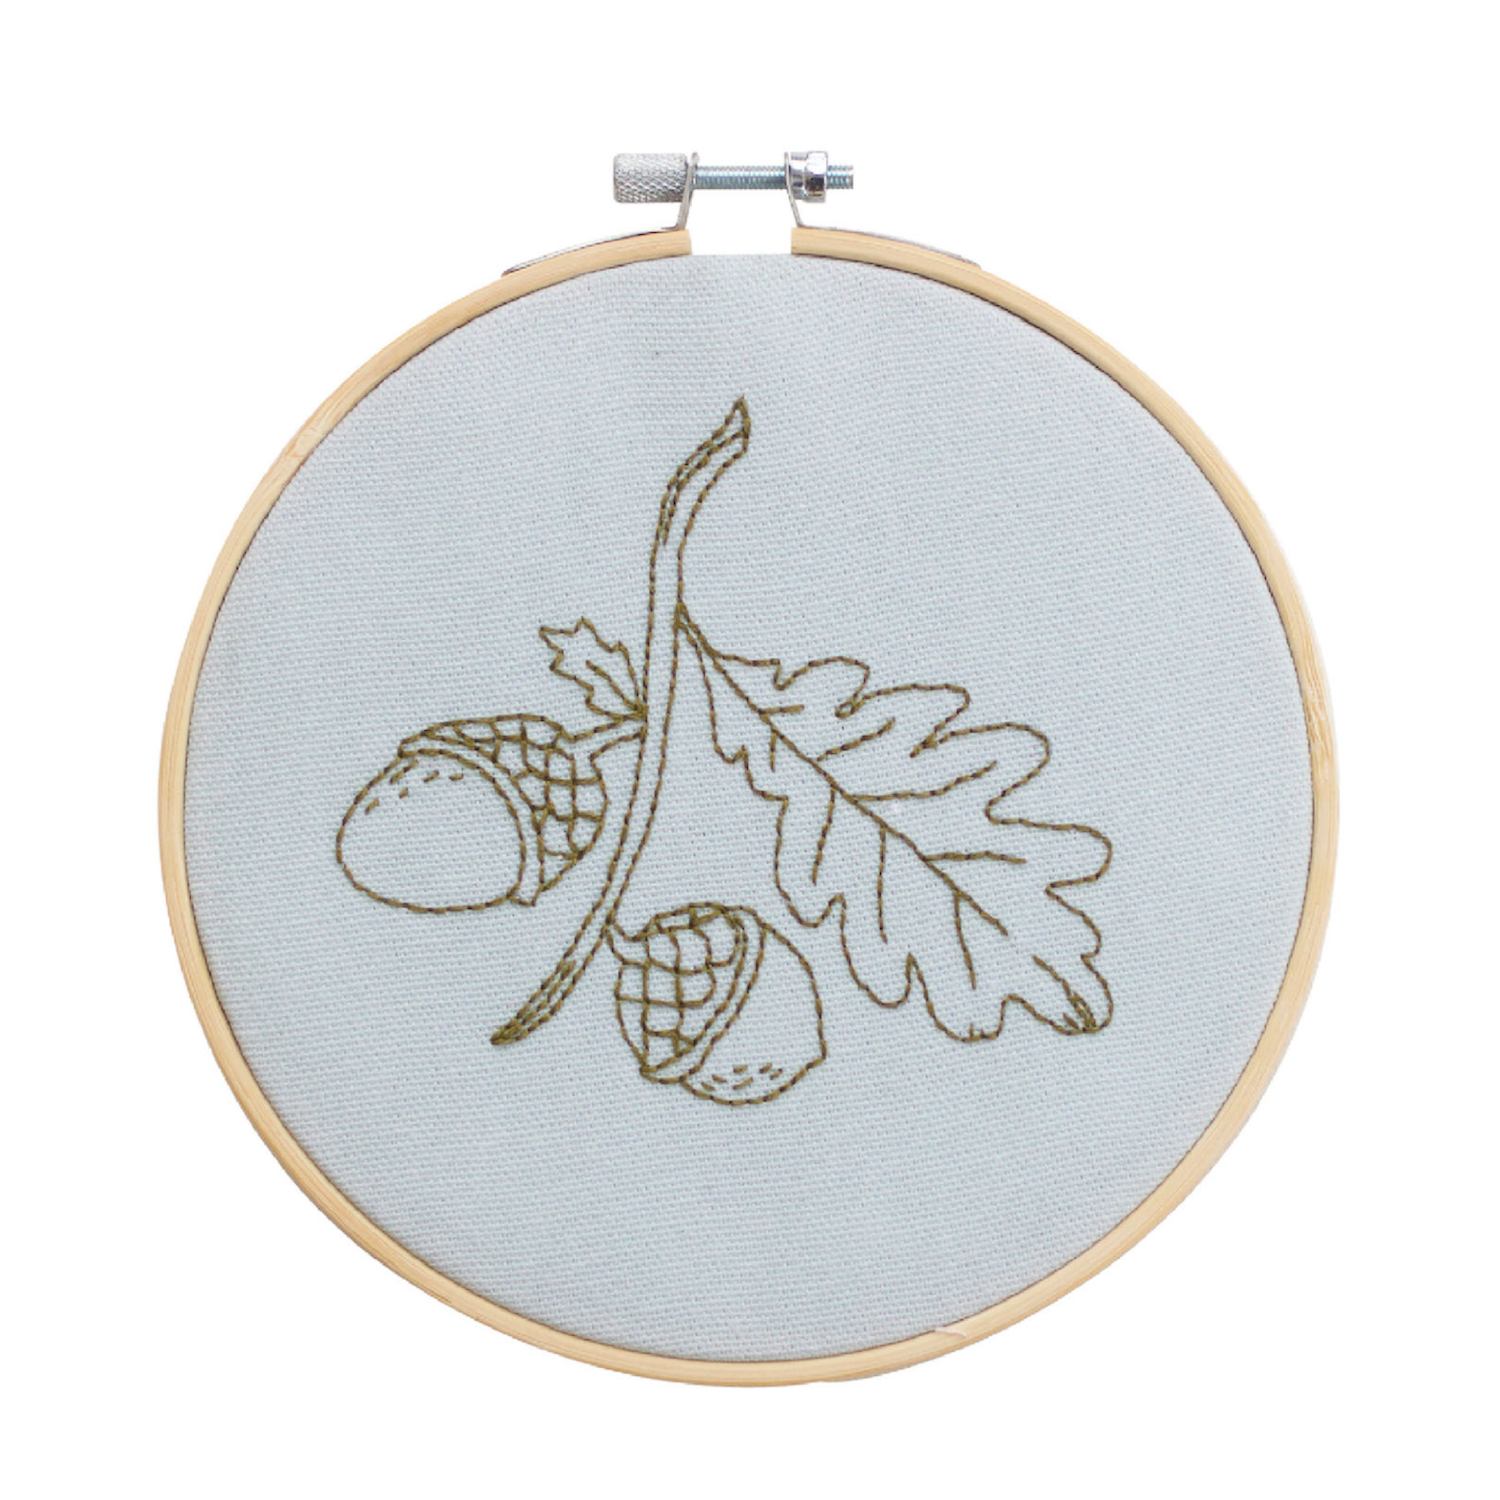 Large Embroidery Hoop Kit - 'Busy Hands Happy Heart' - Cotton Clara